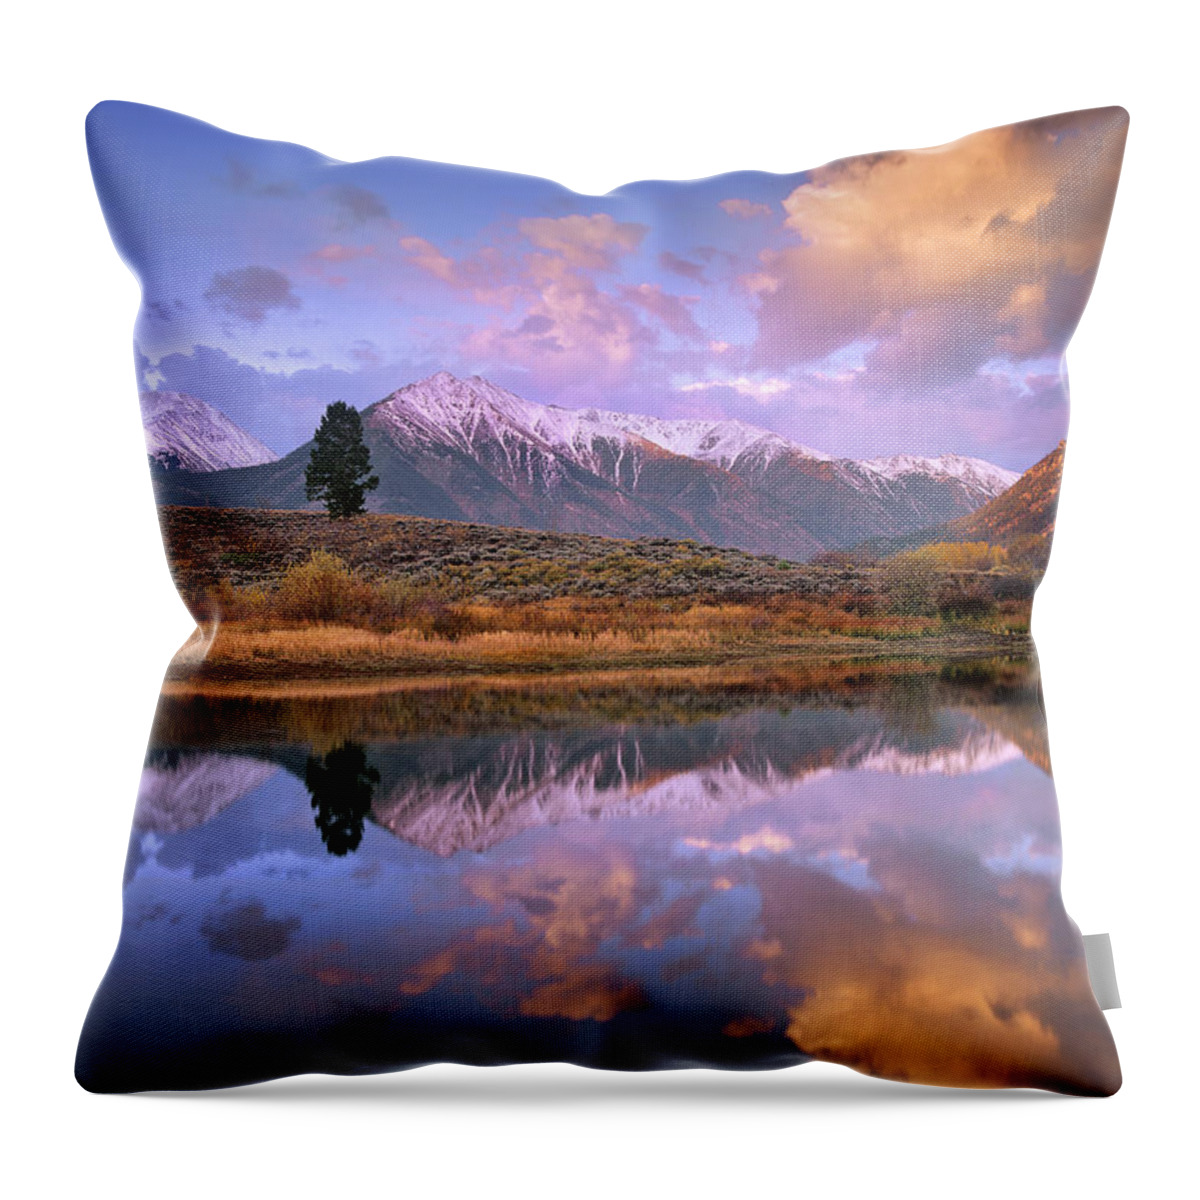 00175828 Throw Pillow featuring the photograph La Plata And Twin Peaks by Tim Fitzharris